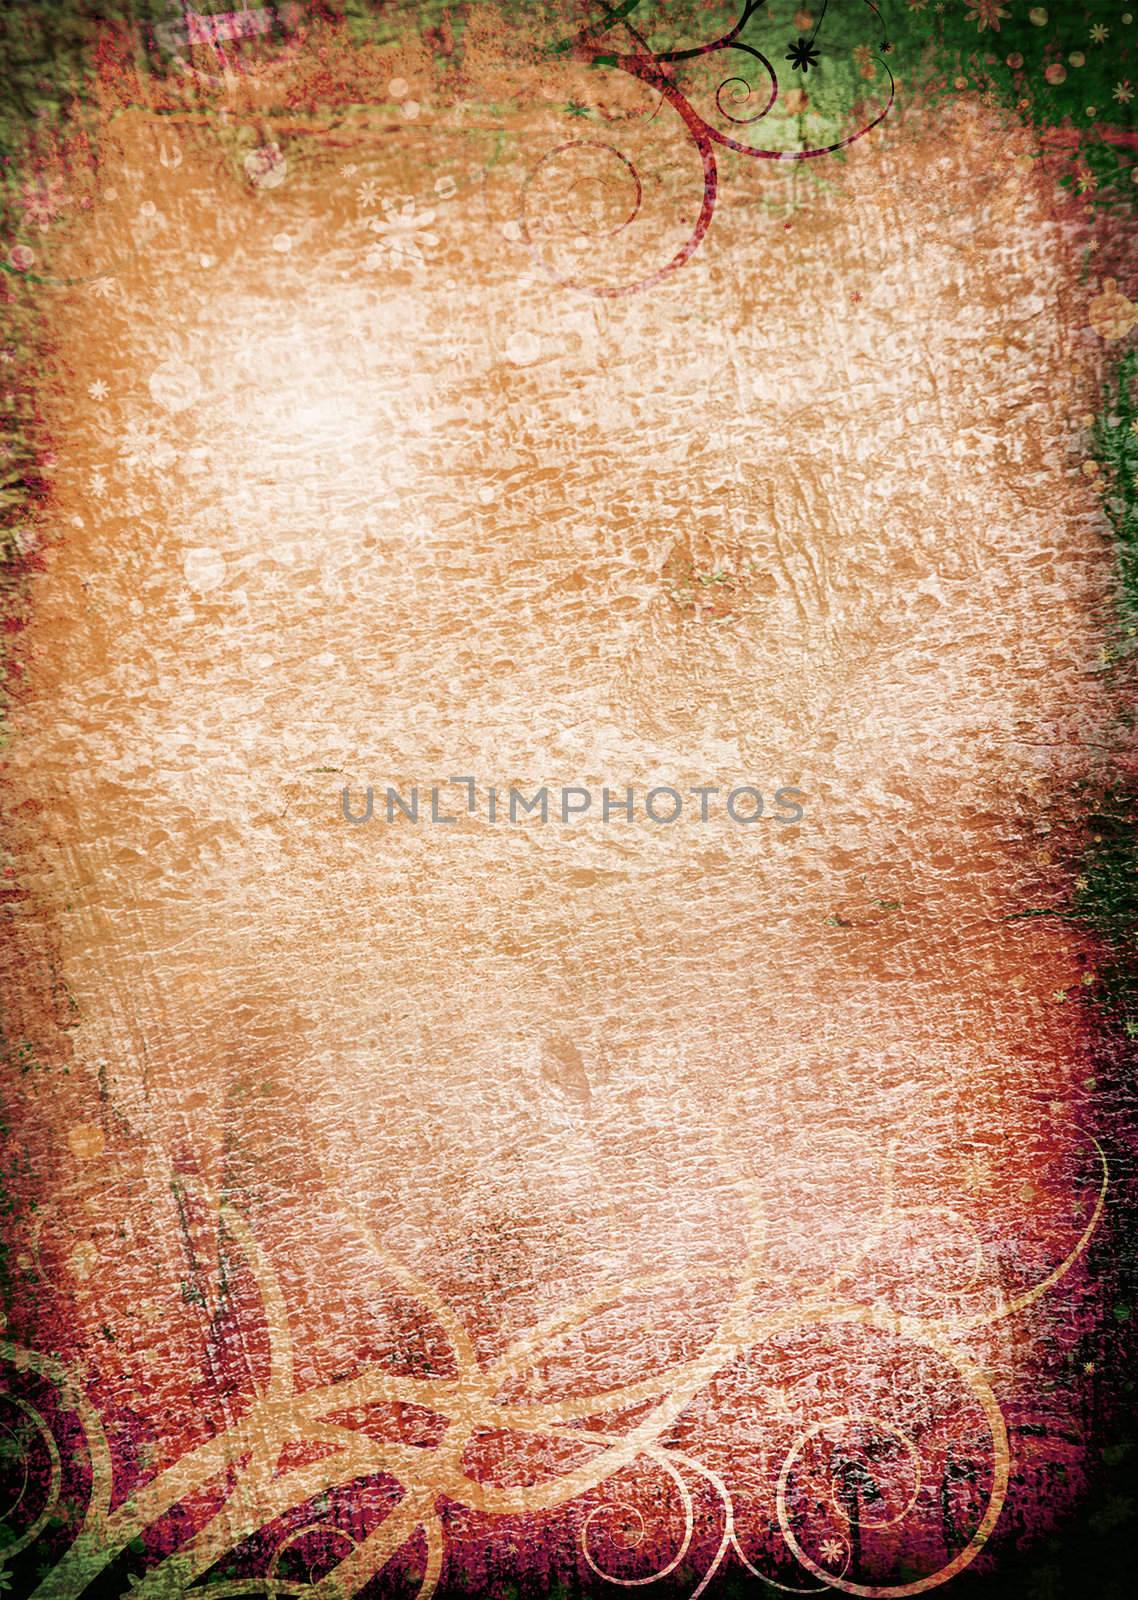 Wax wood background effect overlayed by a floral design